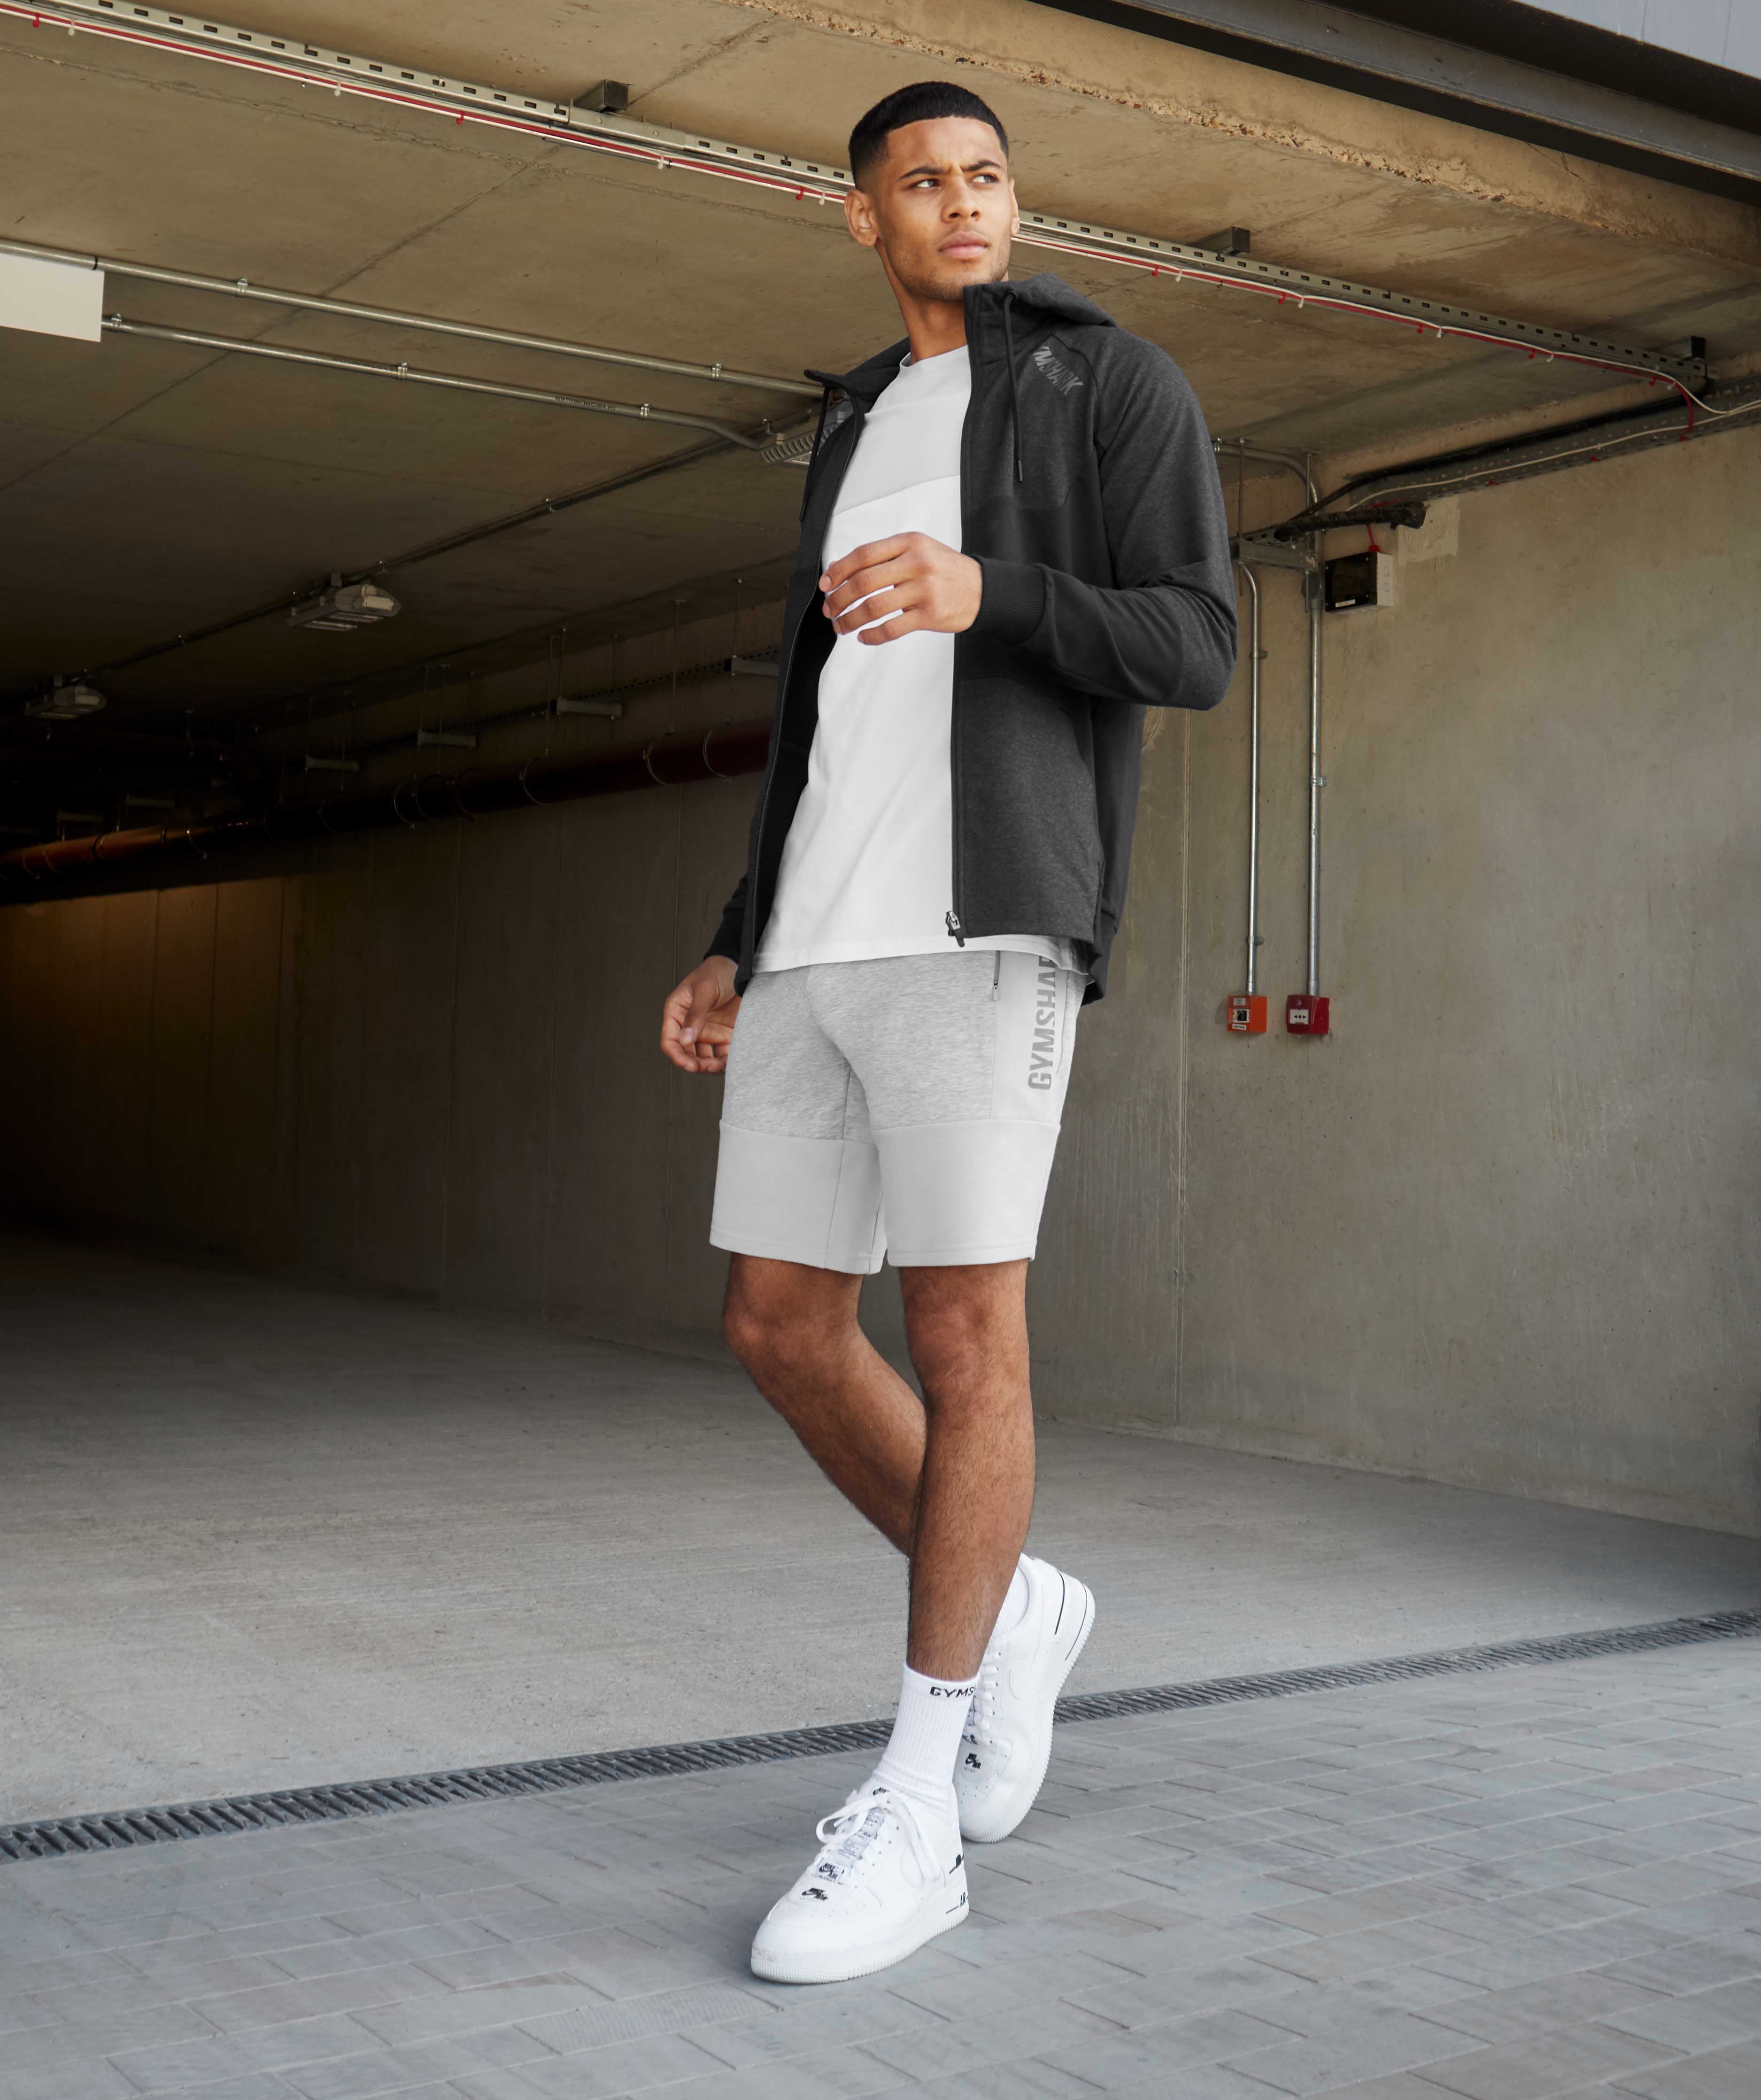 Revive Shorts in Light Grey/Light Grey Marl - view 2